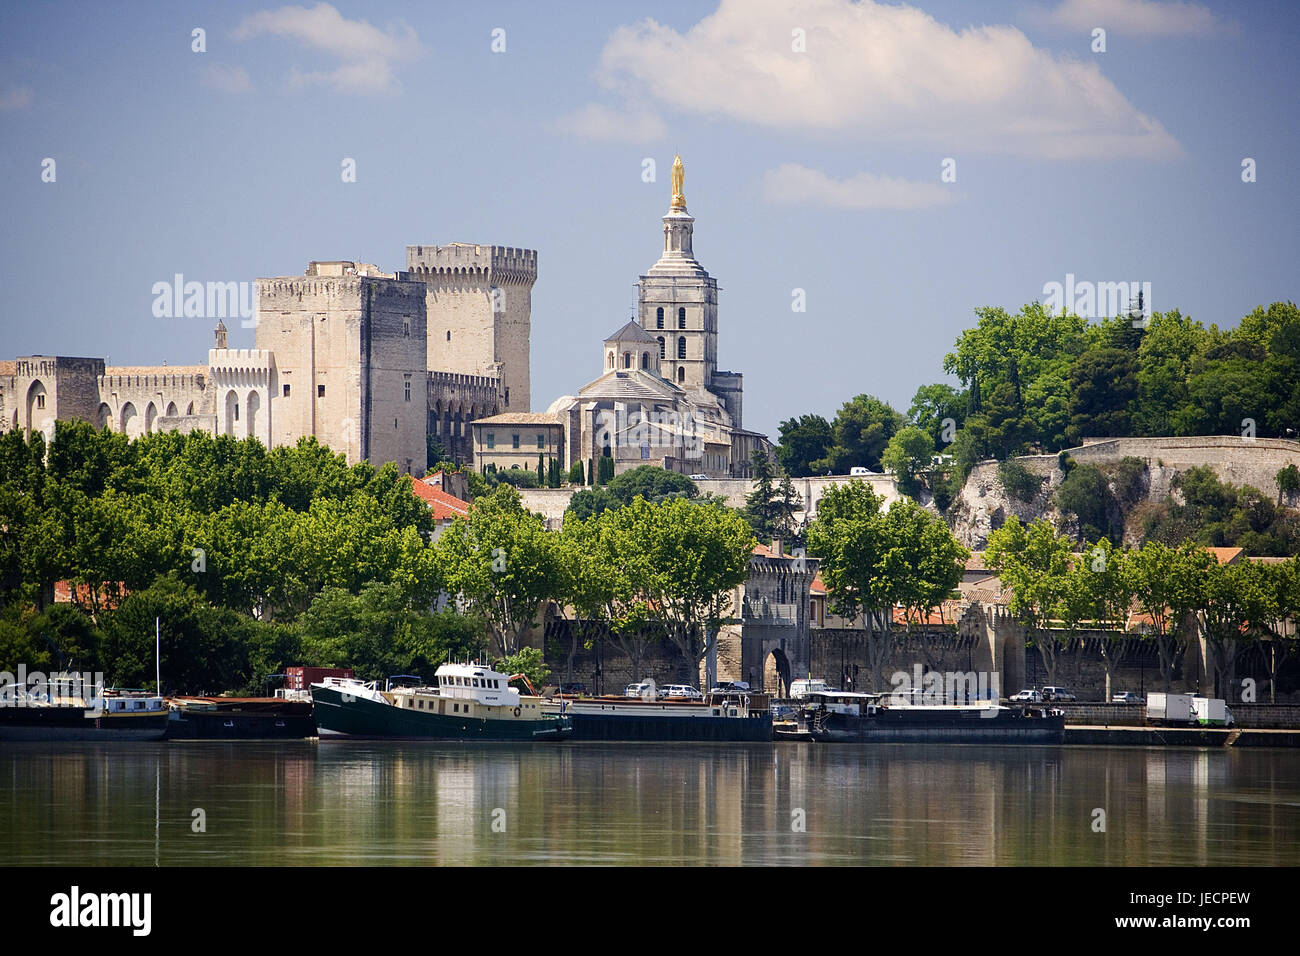 France, Provence, Avignon, town view, pope's palace, town, palace, doubles palace, structure, architecture, culture, place of interest, river, the Rhone, boats, ships, destination, tourism, UNESCO-world cultural heritage, Stock Photo